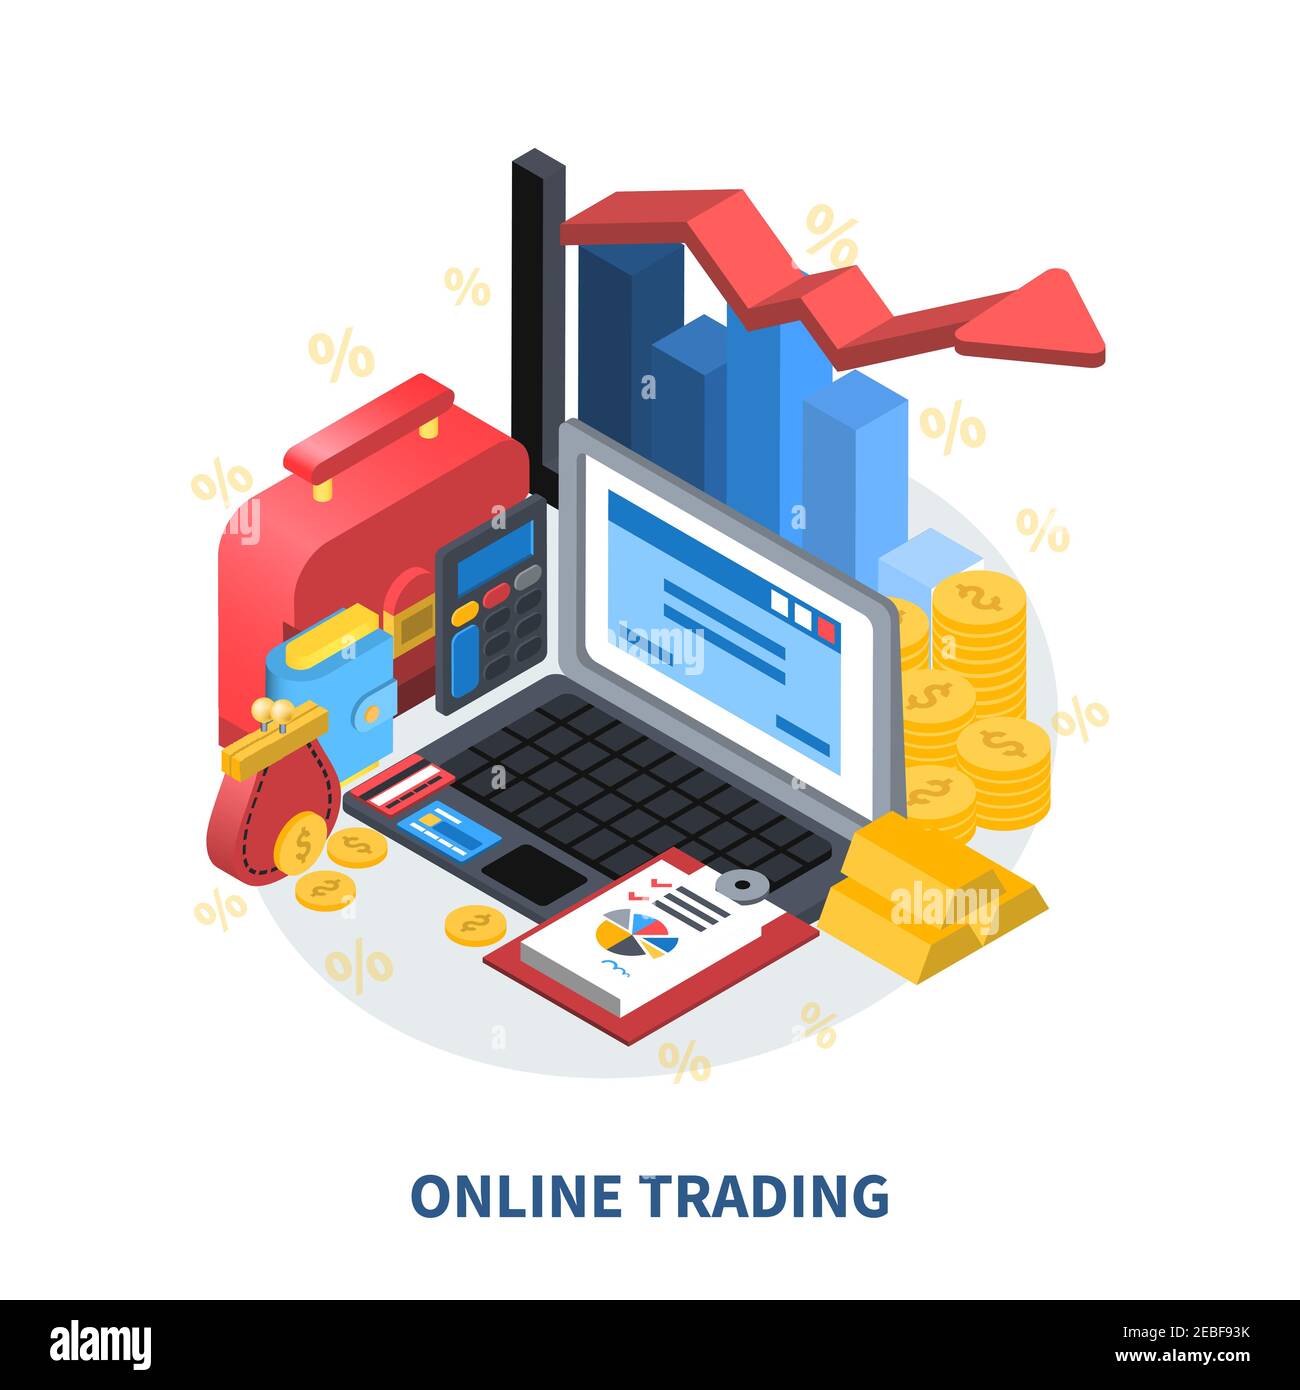 Online trading financial isometric icons composition with diagram arrow columns credit card gold coins money wallet suitcase vector illustration Stock Vector